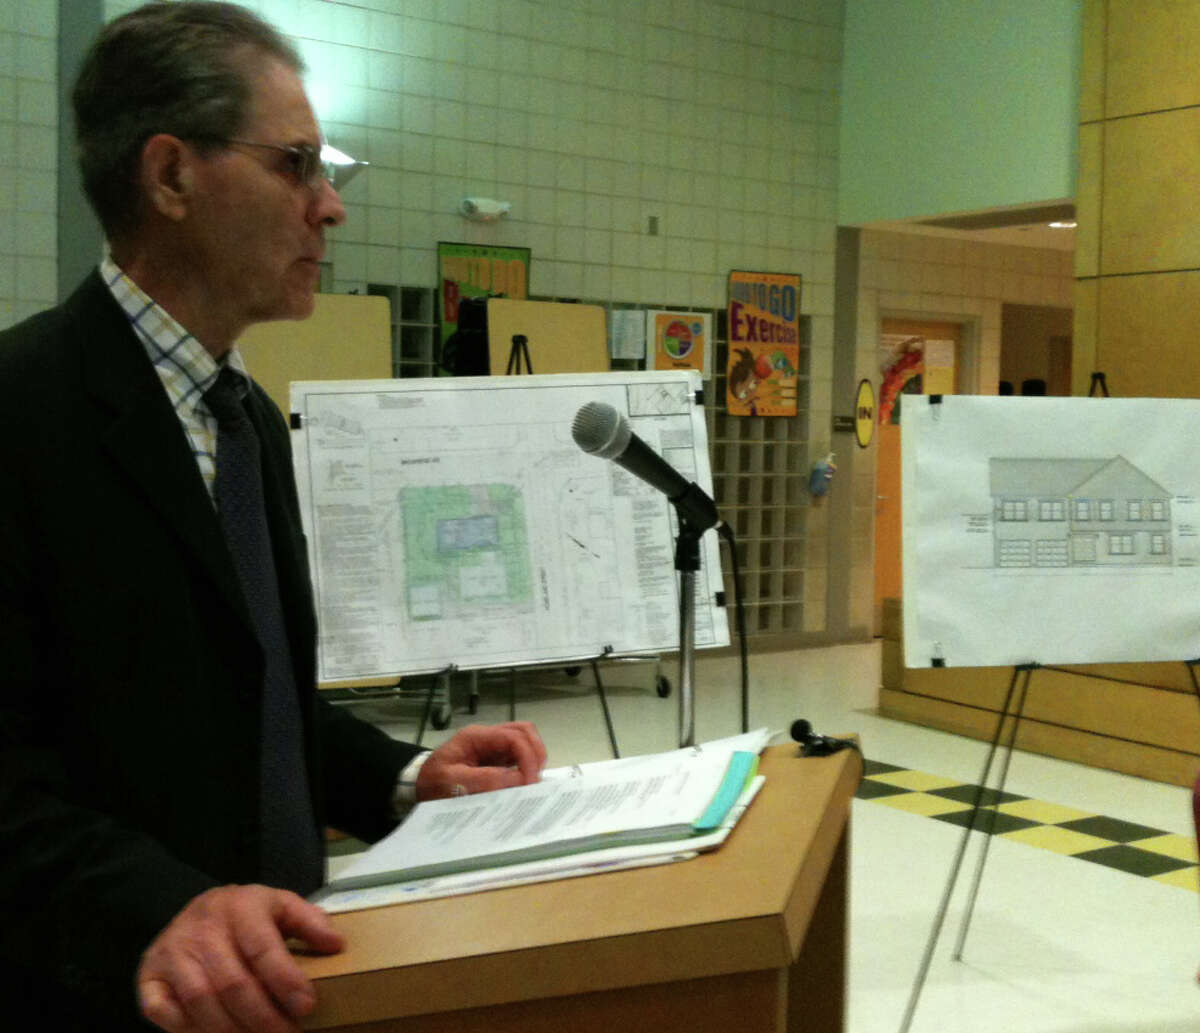 James Sakonchick of Cheshire presents his proposed development on Homeland Street to the Town Plan and Zoning Commission during a public hearing Tuesday night.